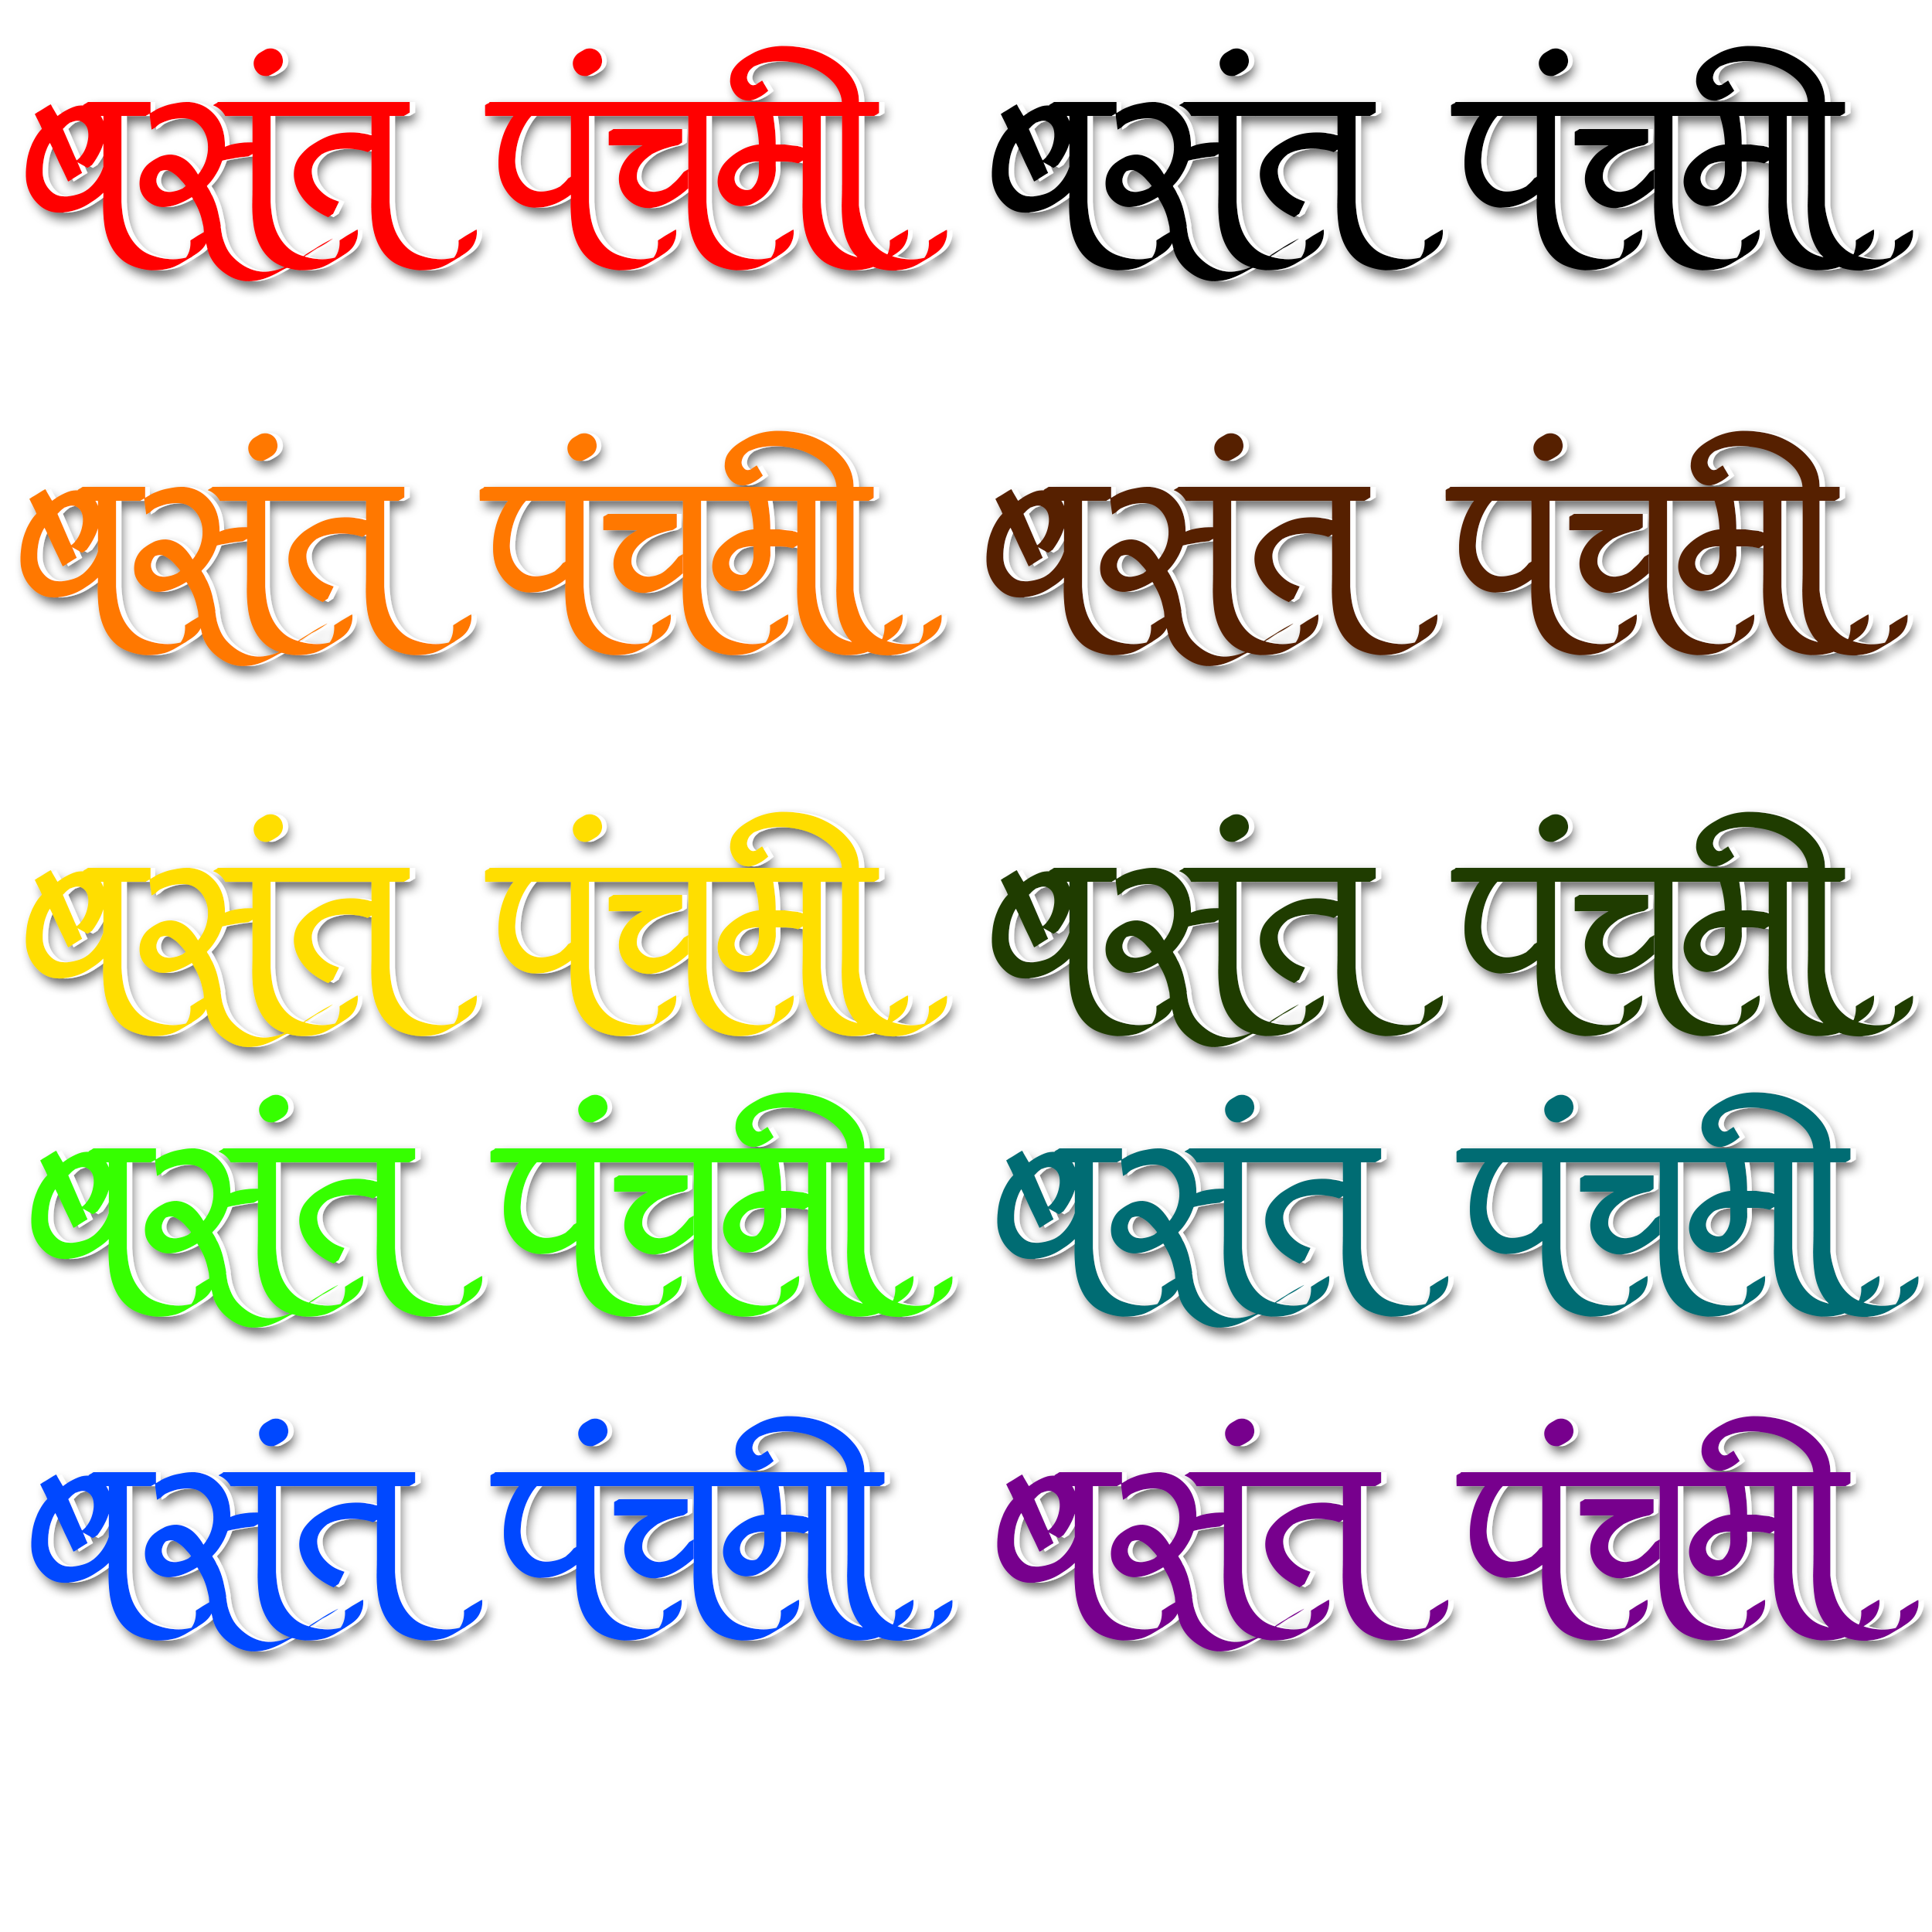 Vasant Panchami Hindi Calligraphy Text Png Free Download 10 Different Colors